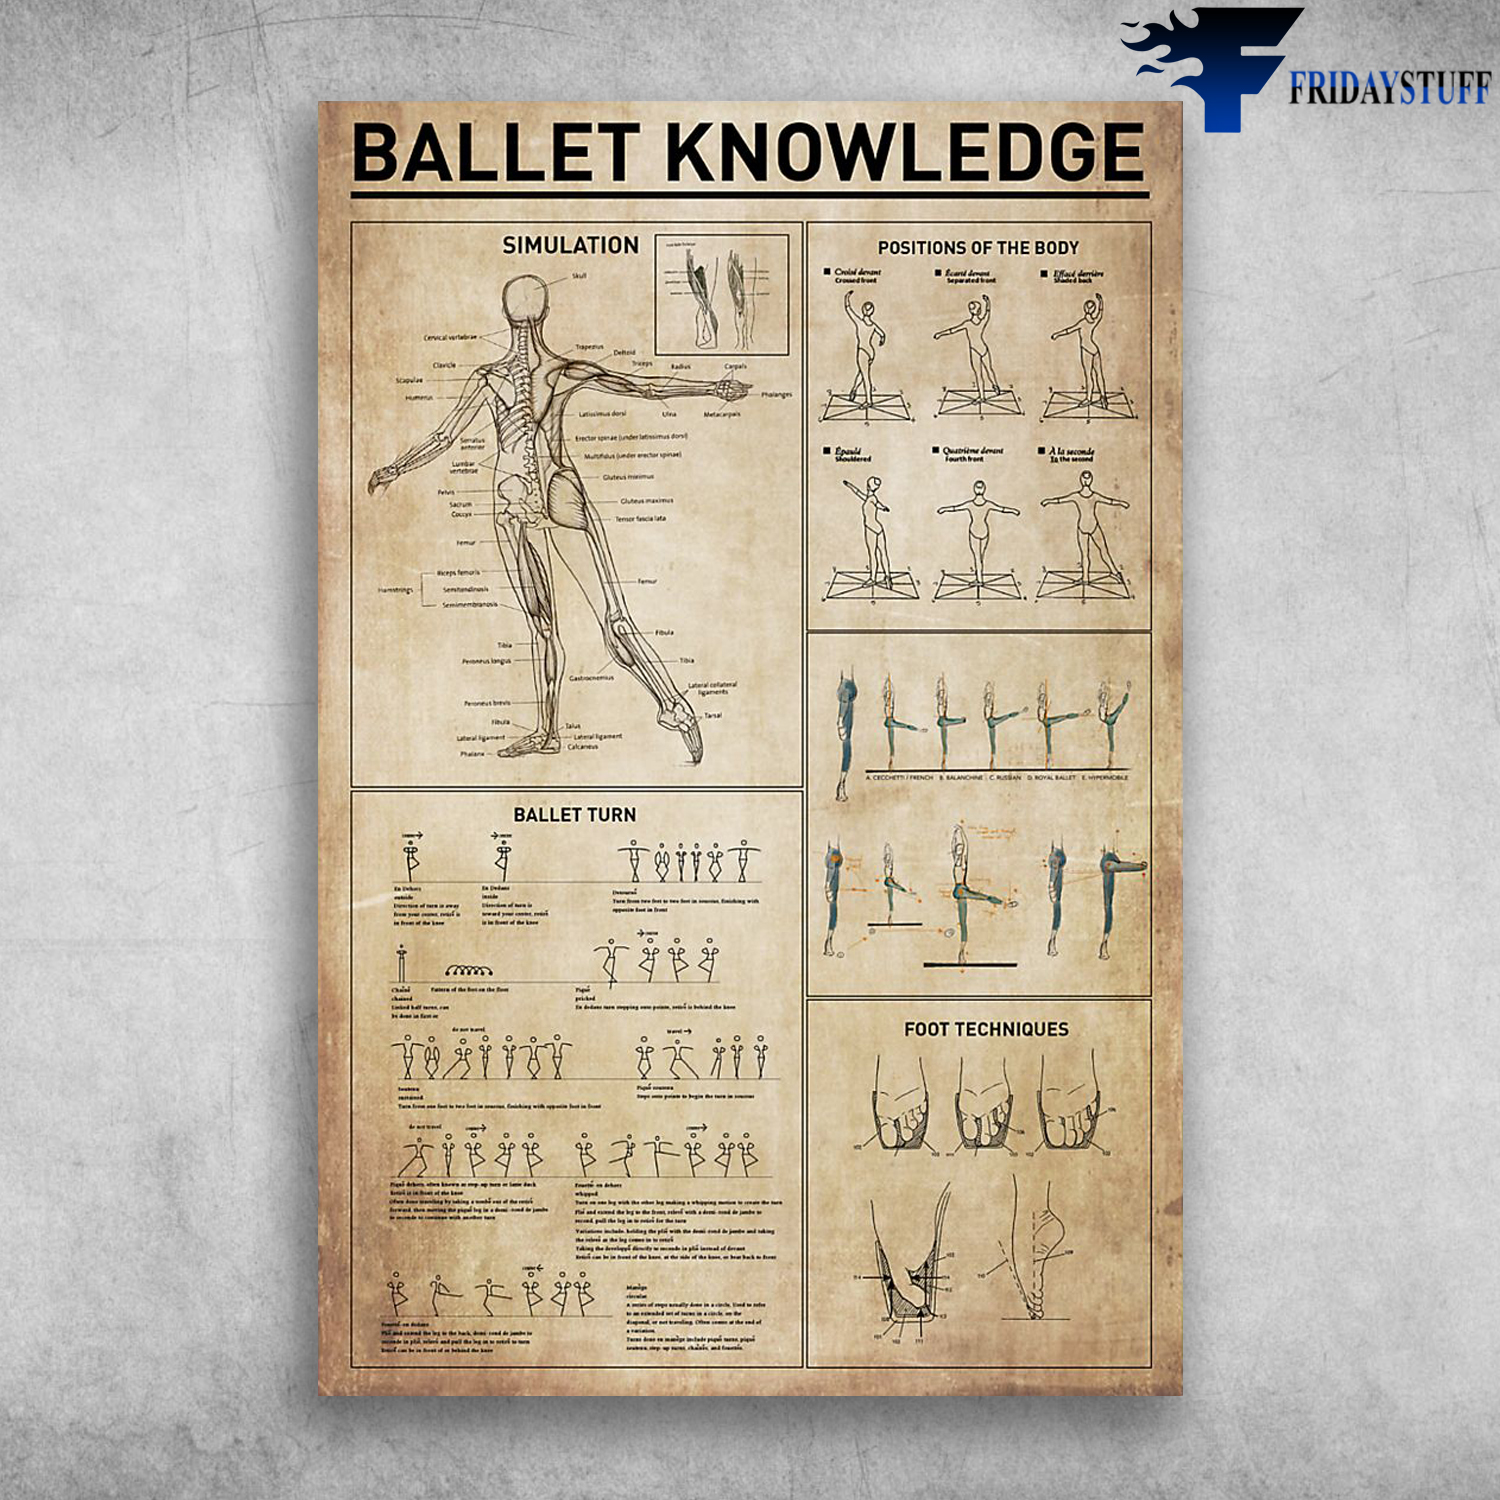 Ballet Knowledge Simulation Positions Of The Body Foot Techniques